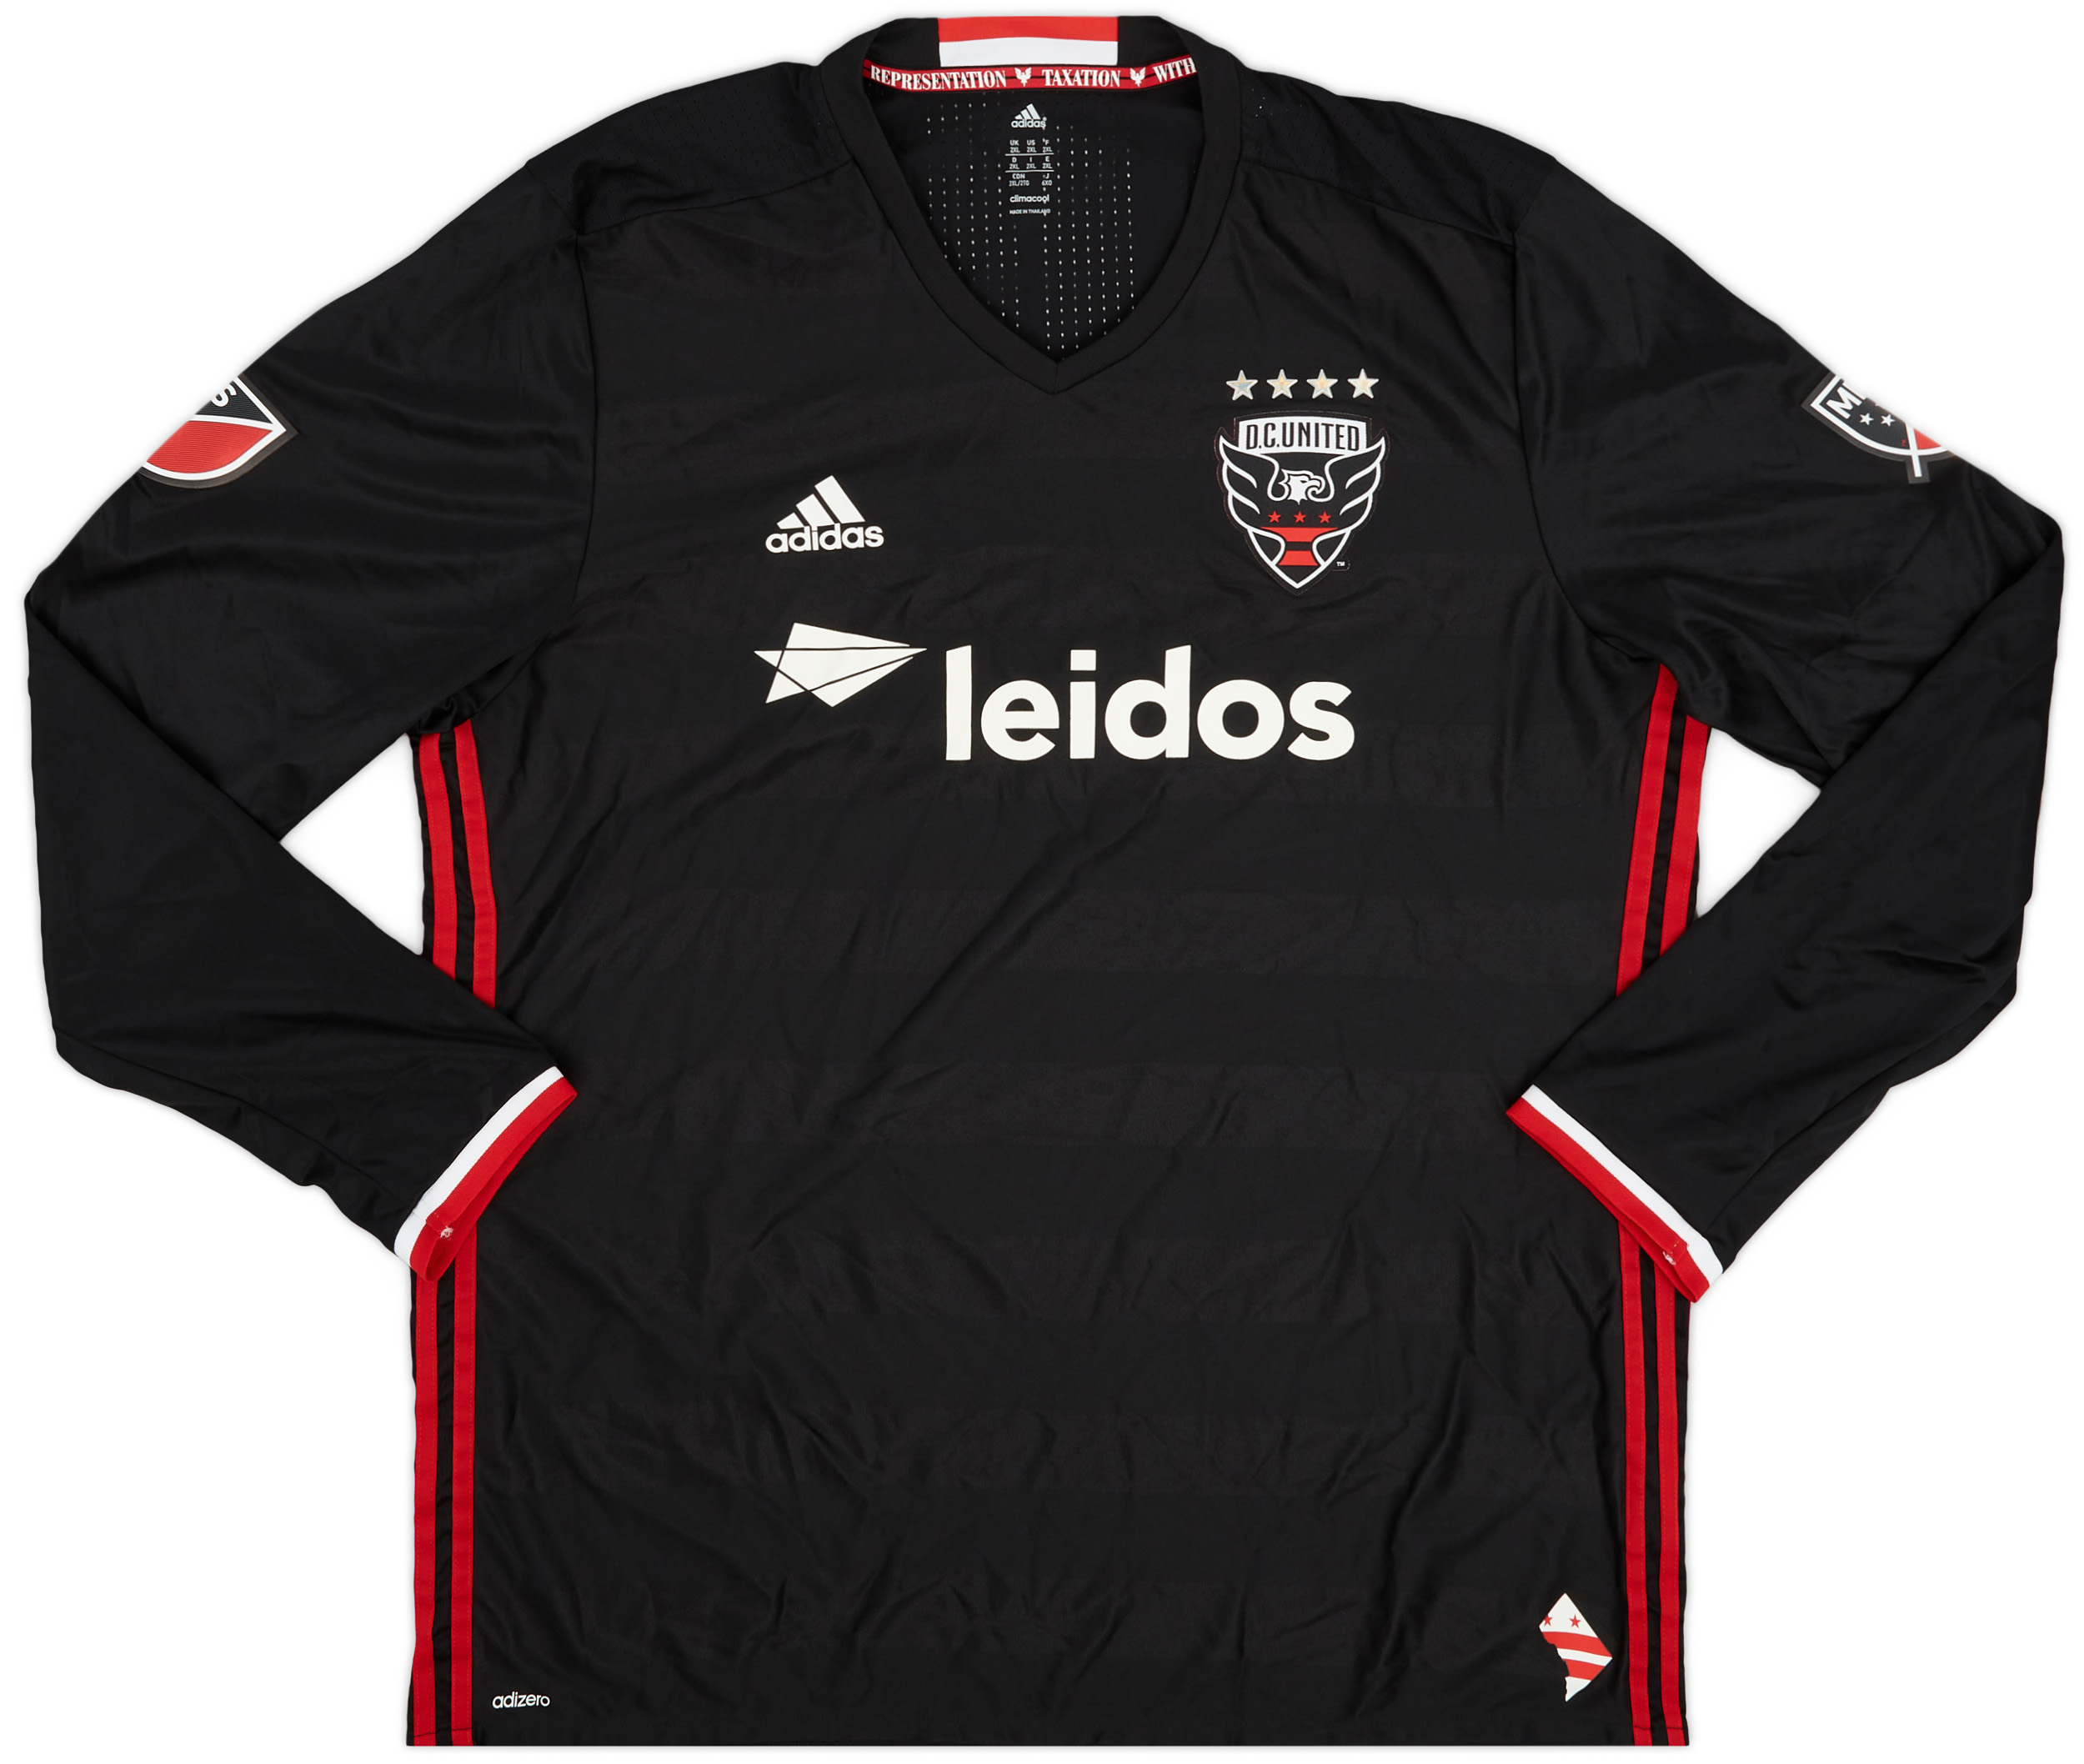 2016 DC United Authentic Home Shirt - 9/10 - ()